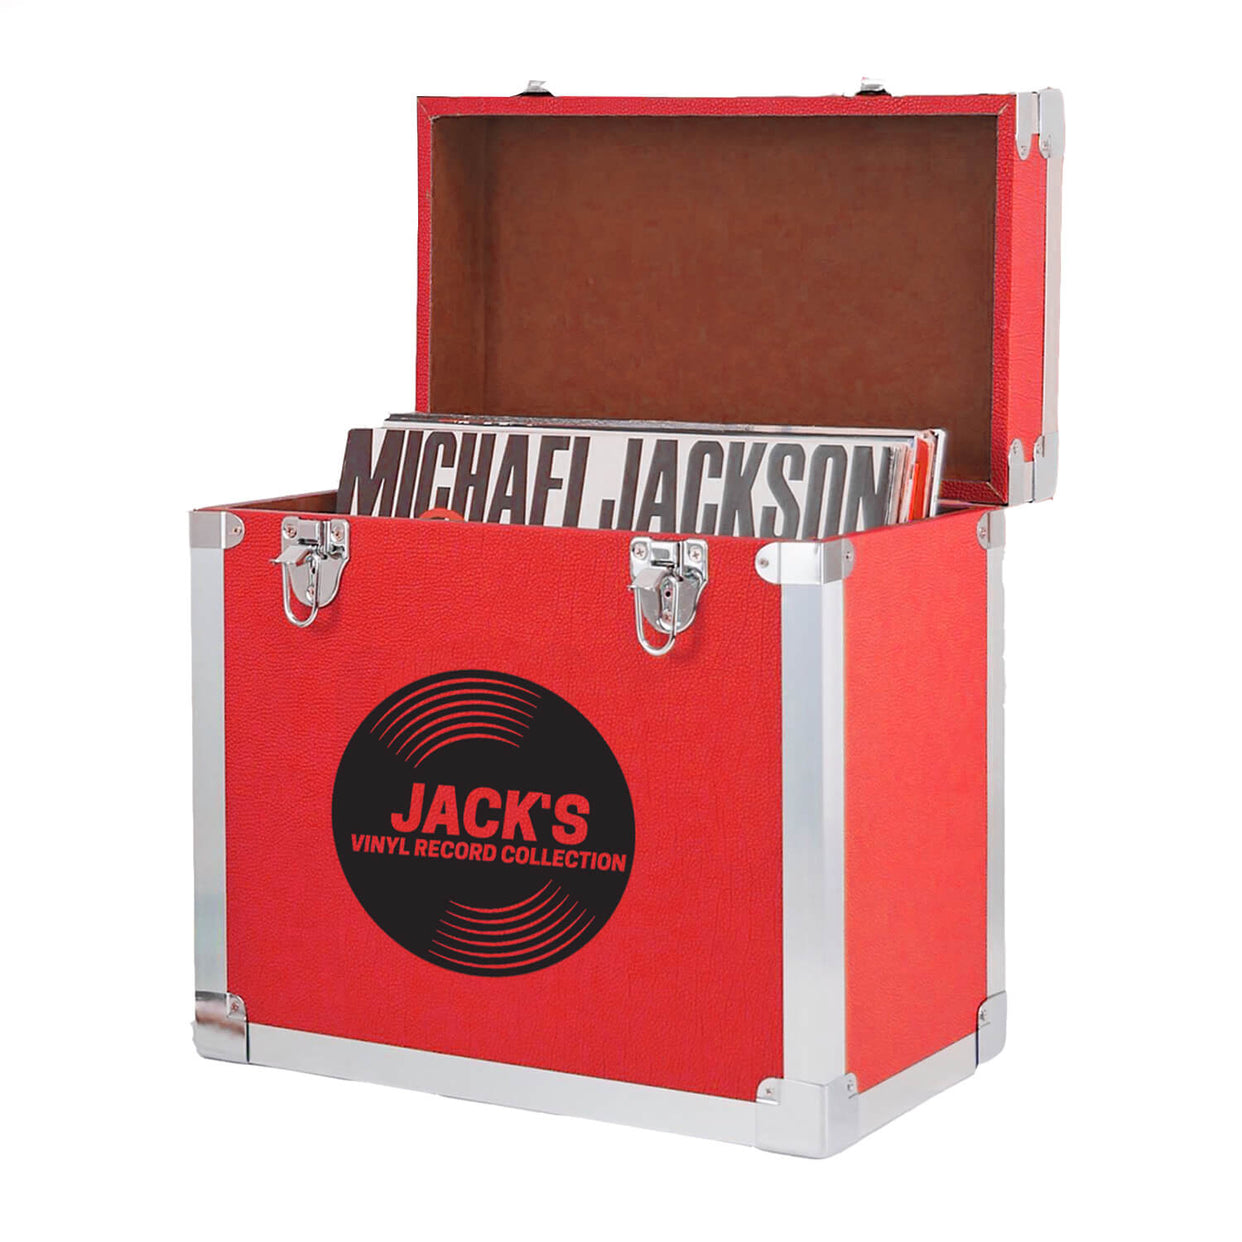 Personalised Music Record Vinyl Storage Box - 12 inch - Red Vinyl - Stores up to 50 records